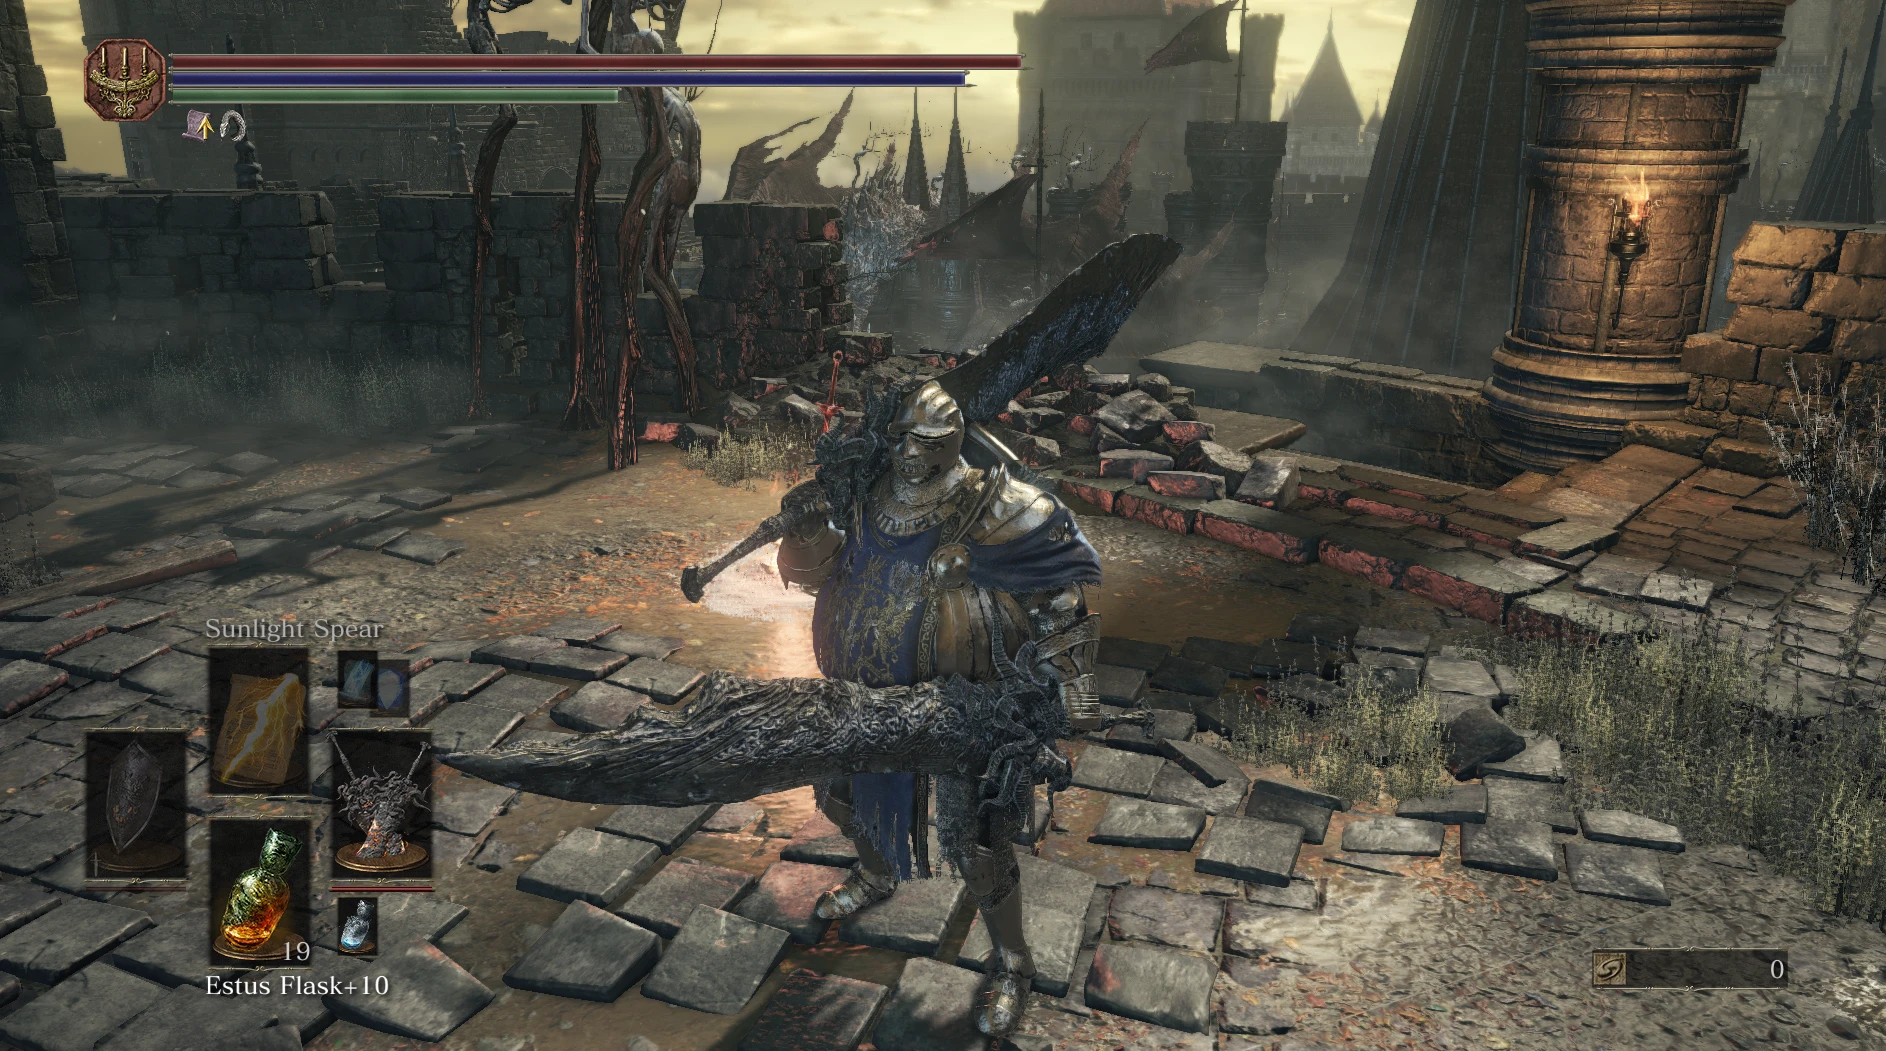 Ultimate How To Save Game In Dark Souls 3 with Futuristic Setup